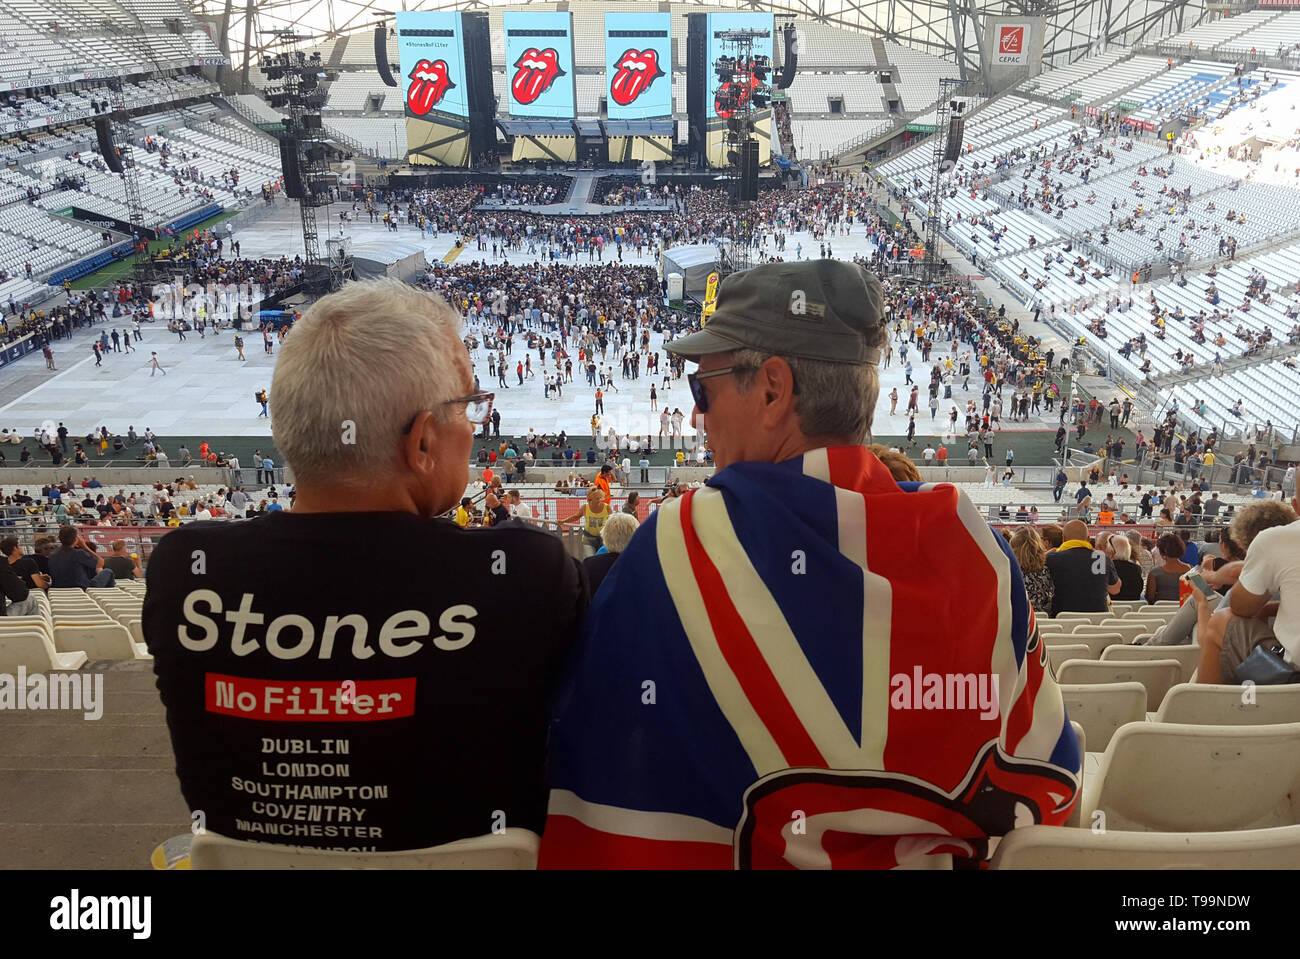 Rolling Stones Rock Music Fans, one Draped with the Union Jack Flag, wait the Start of a Concert by the Rolling Stones during the Legendary Group's No Filter Tour in the Velodrome Stadium Marseille (26 June 2018) Stock Photo